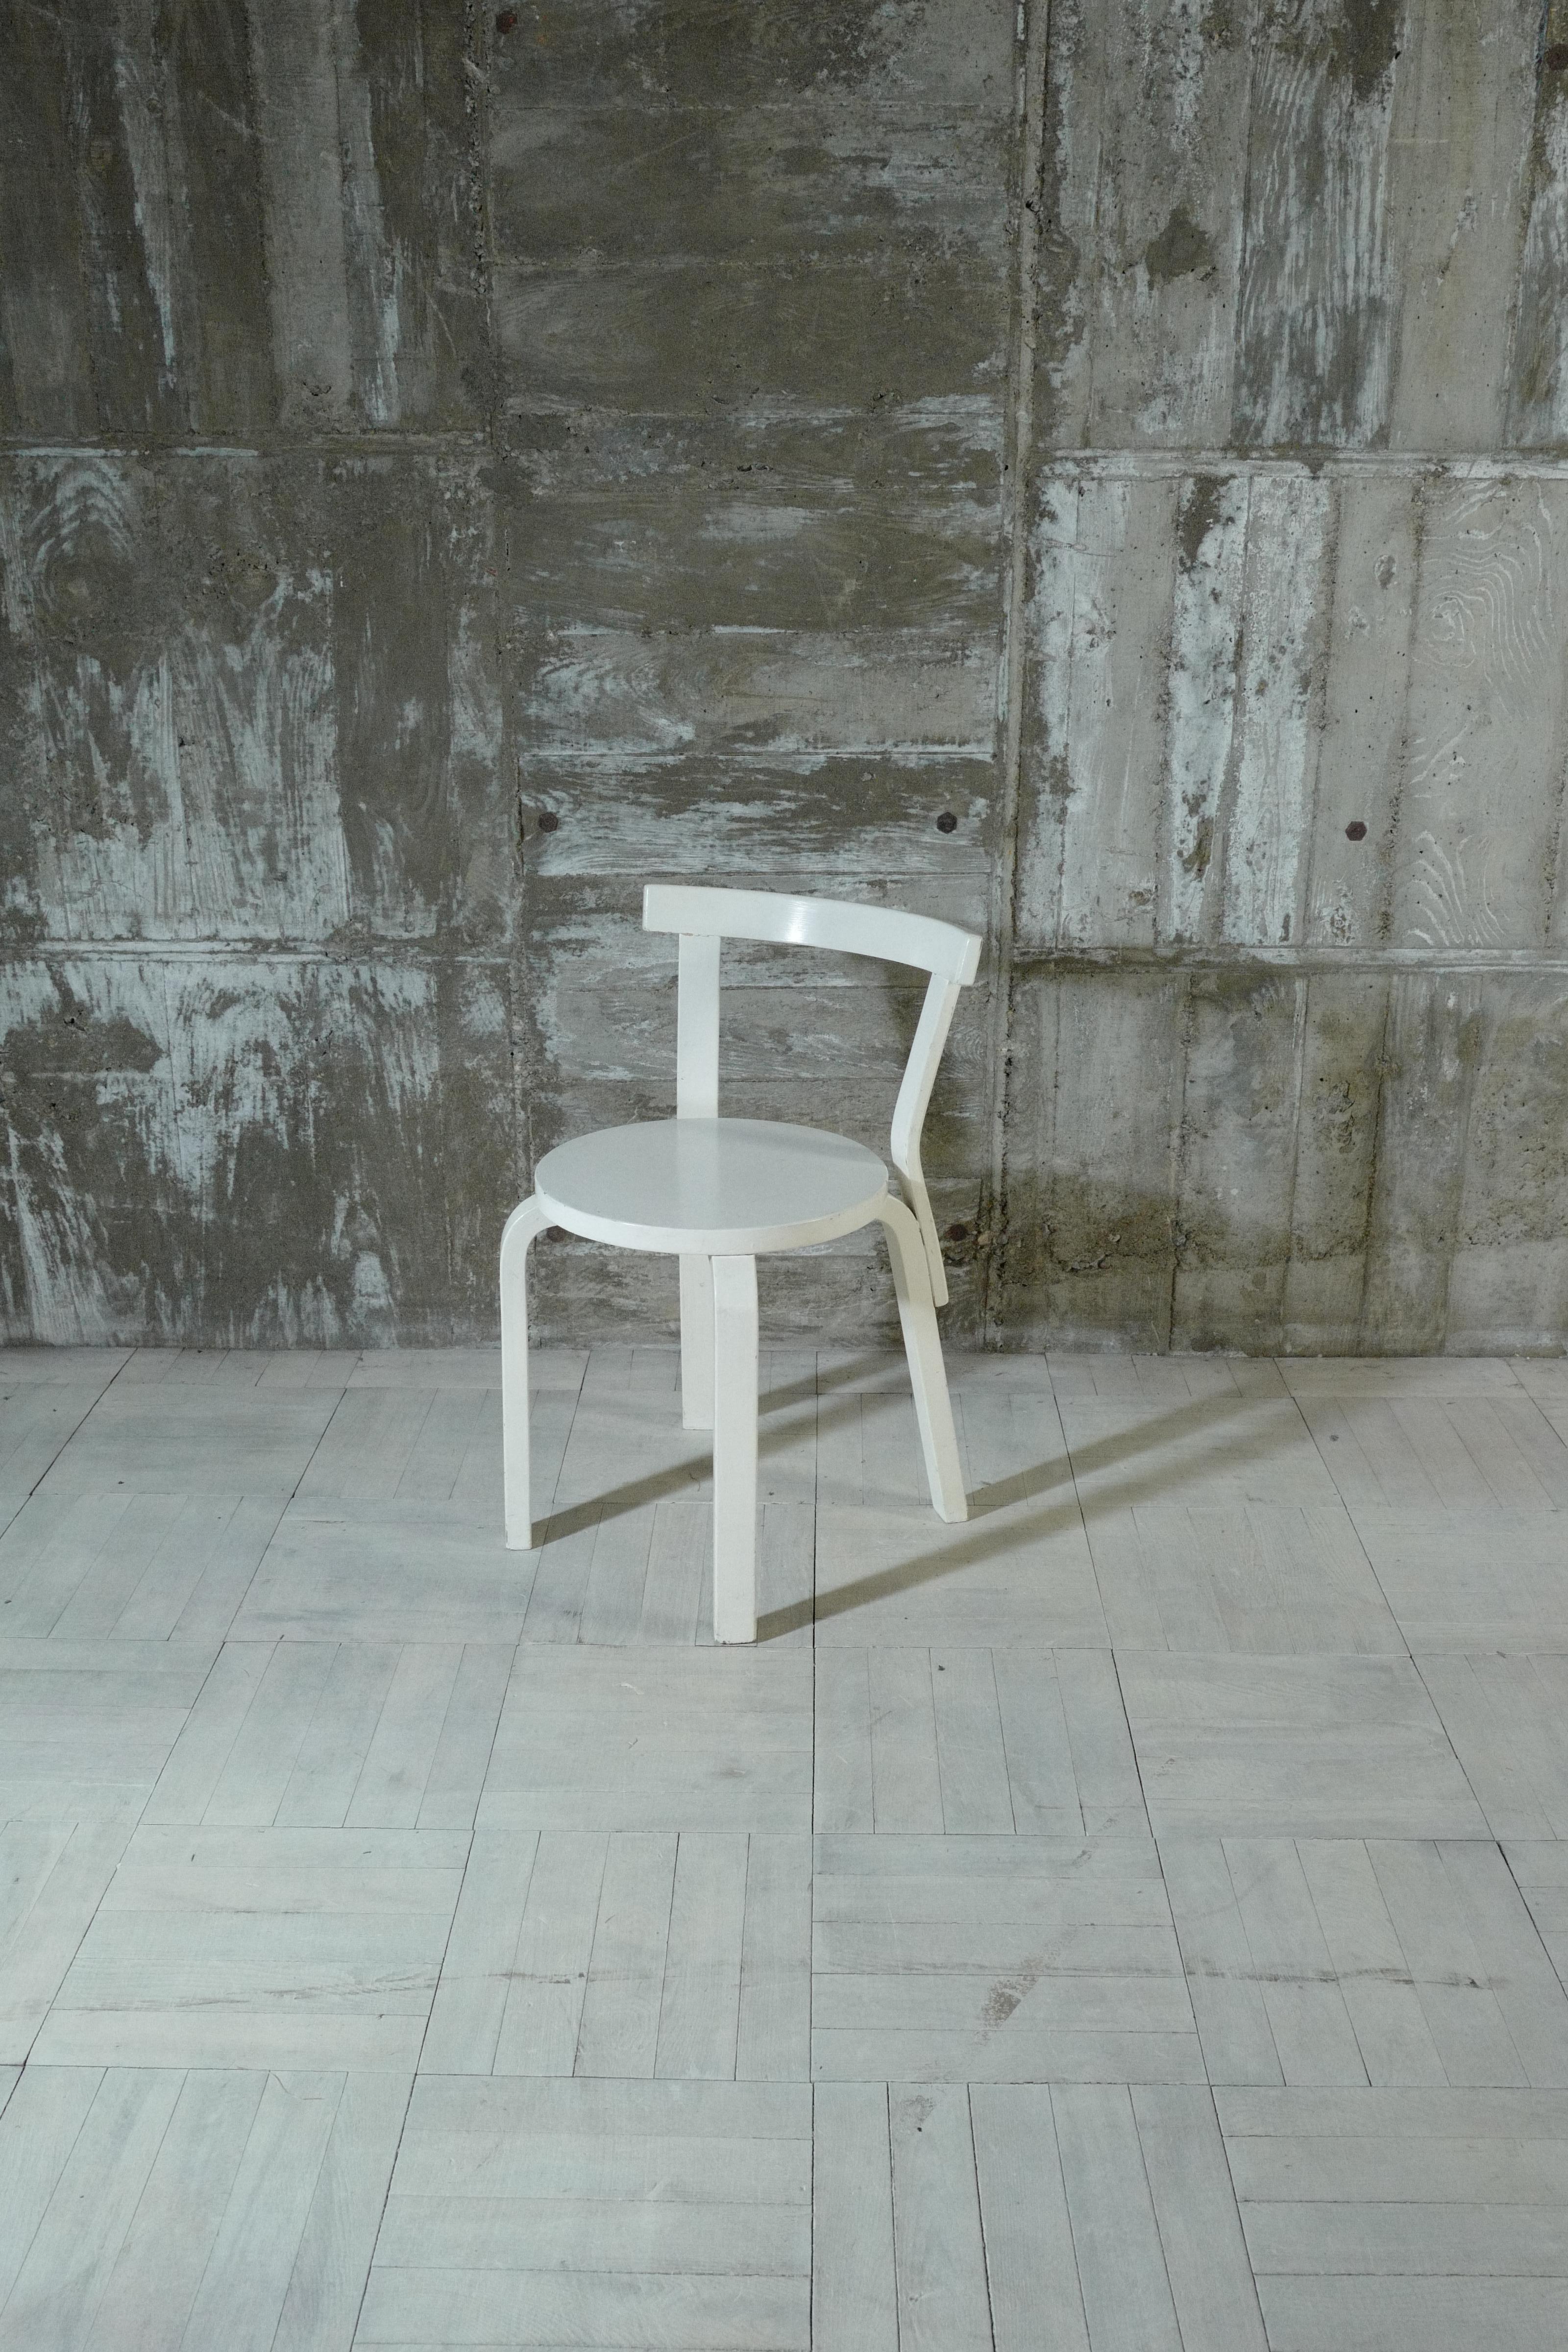 Designed by Alvar Aalto.
This is chair 68 .
White paint is applied all over.
This chair was manufactured in the 1950s.